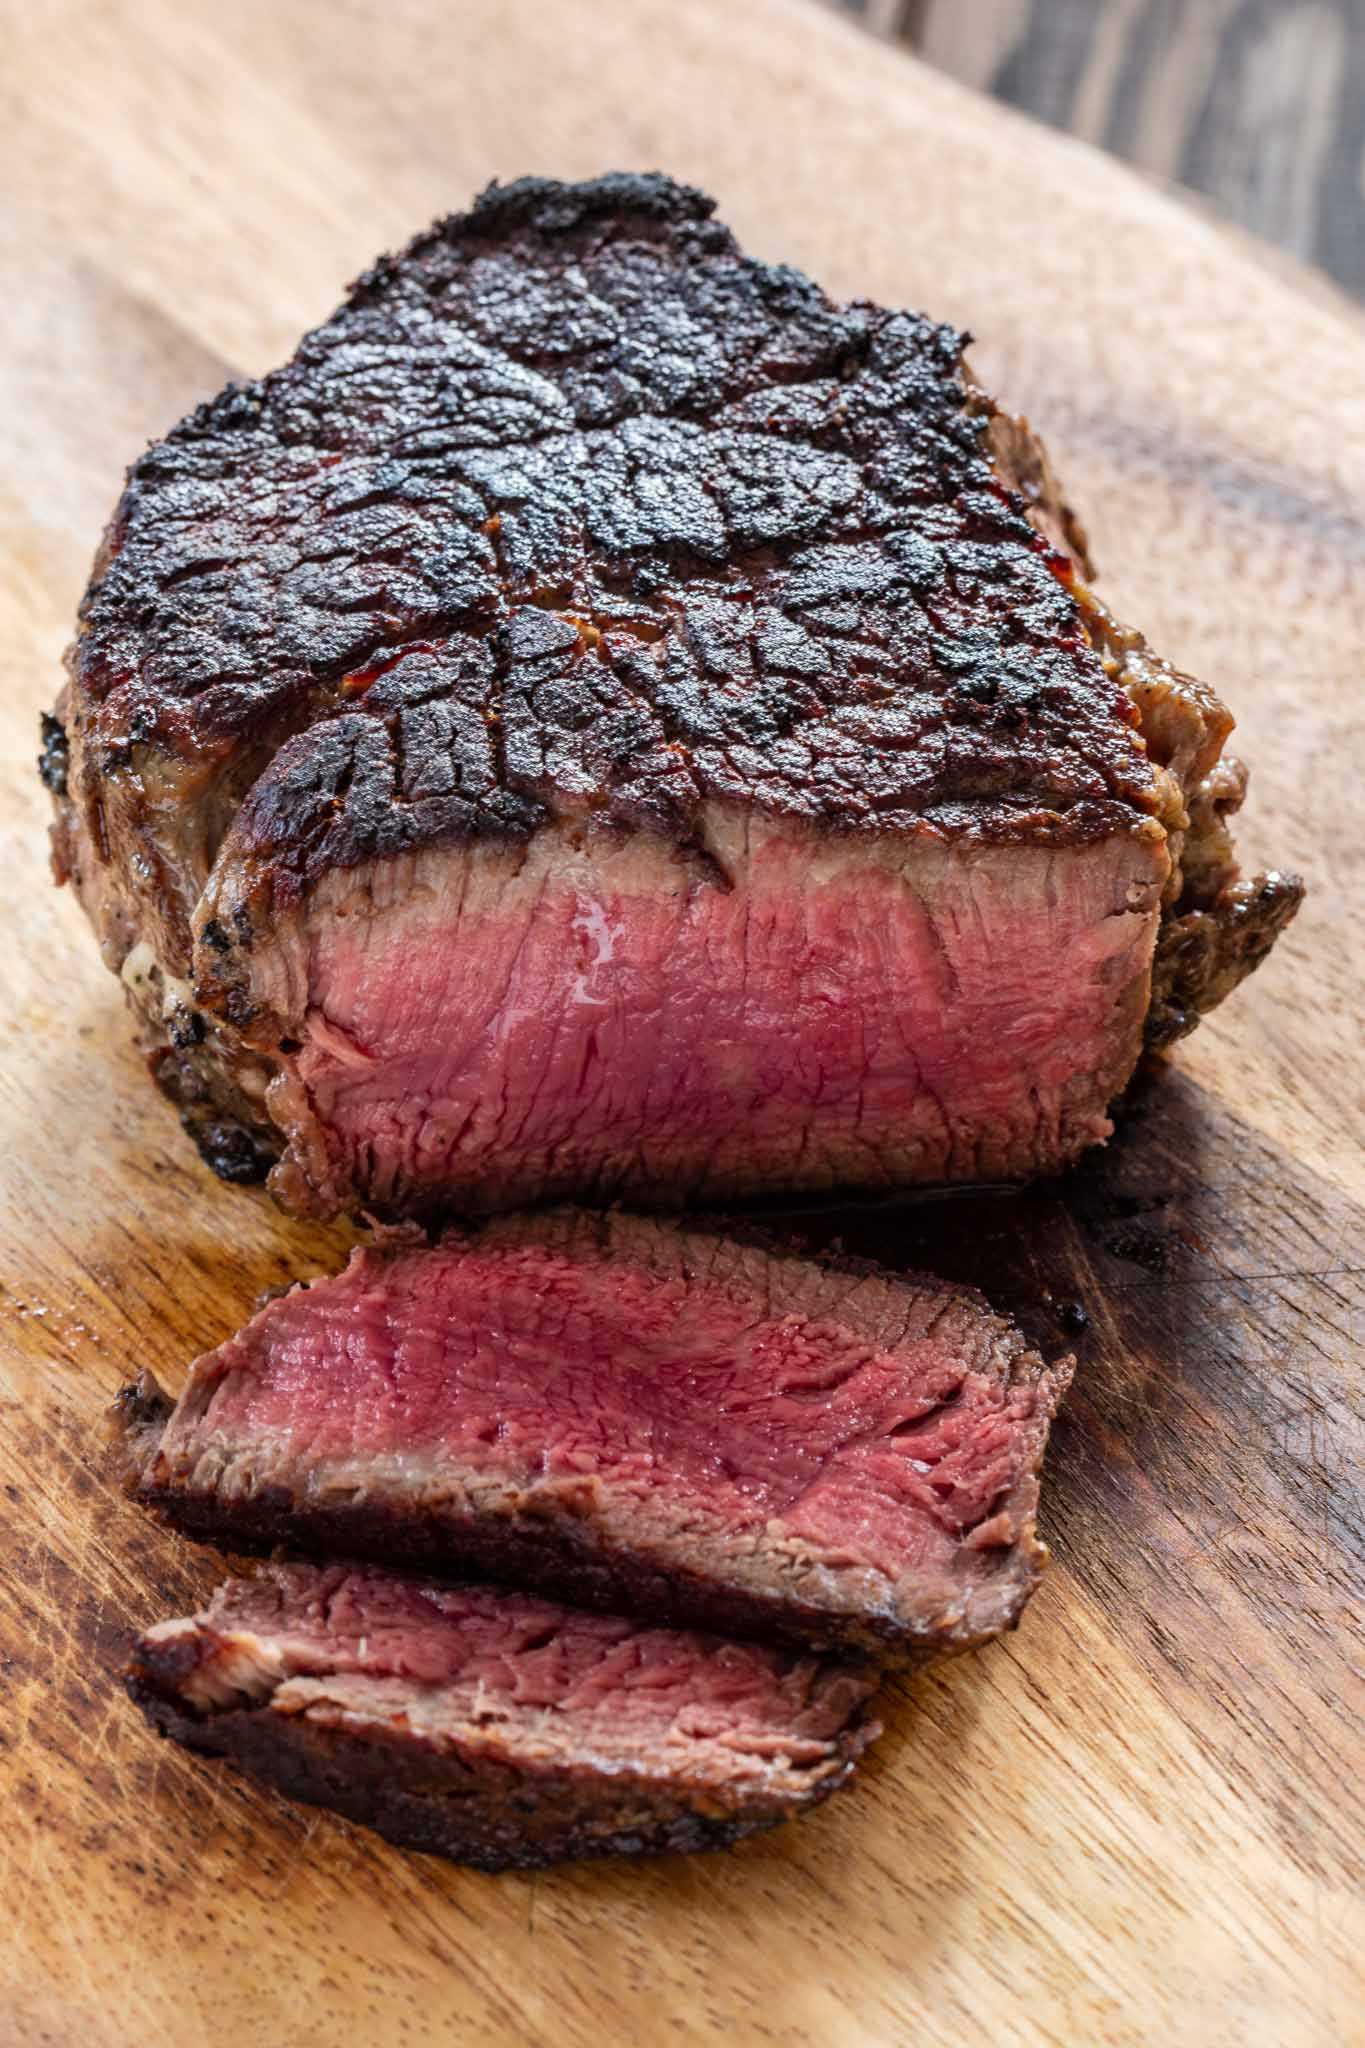 Perfectly cooked filet mignon!